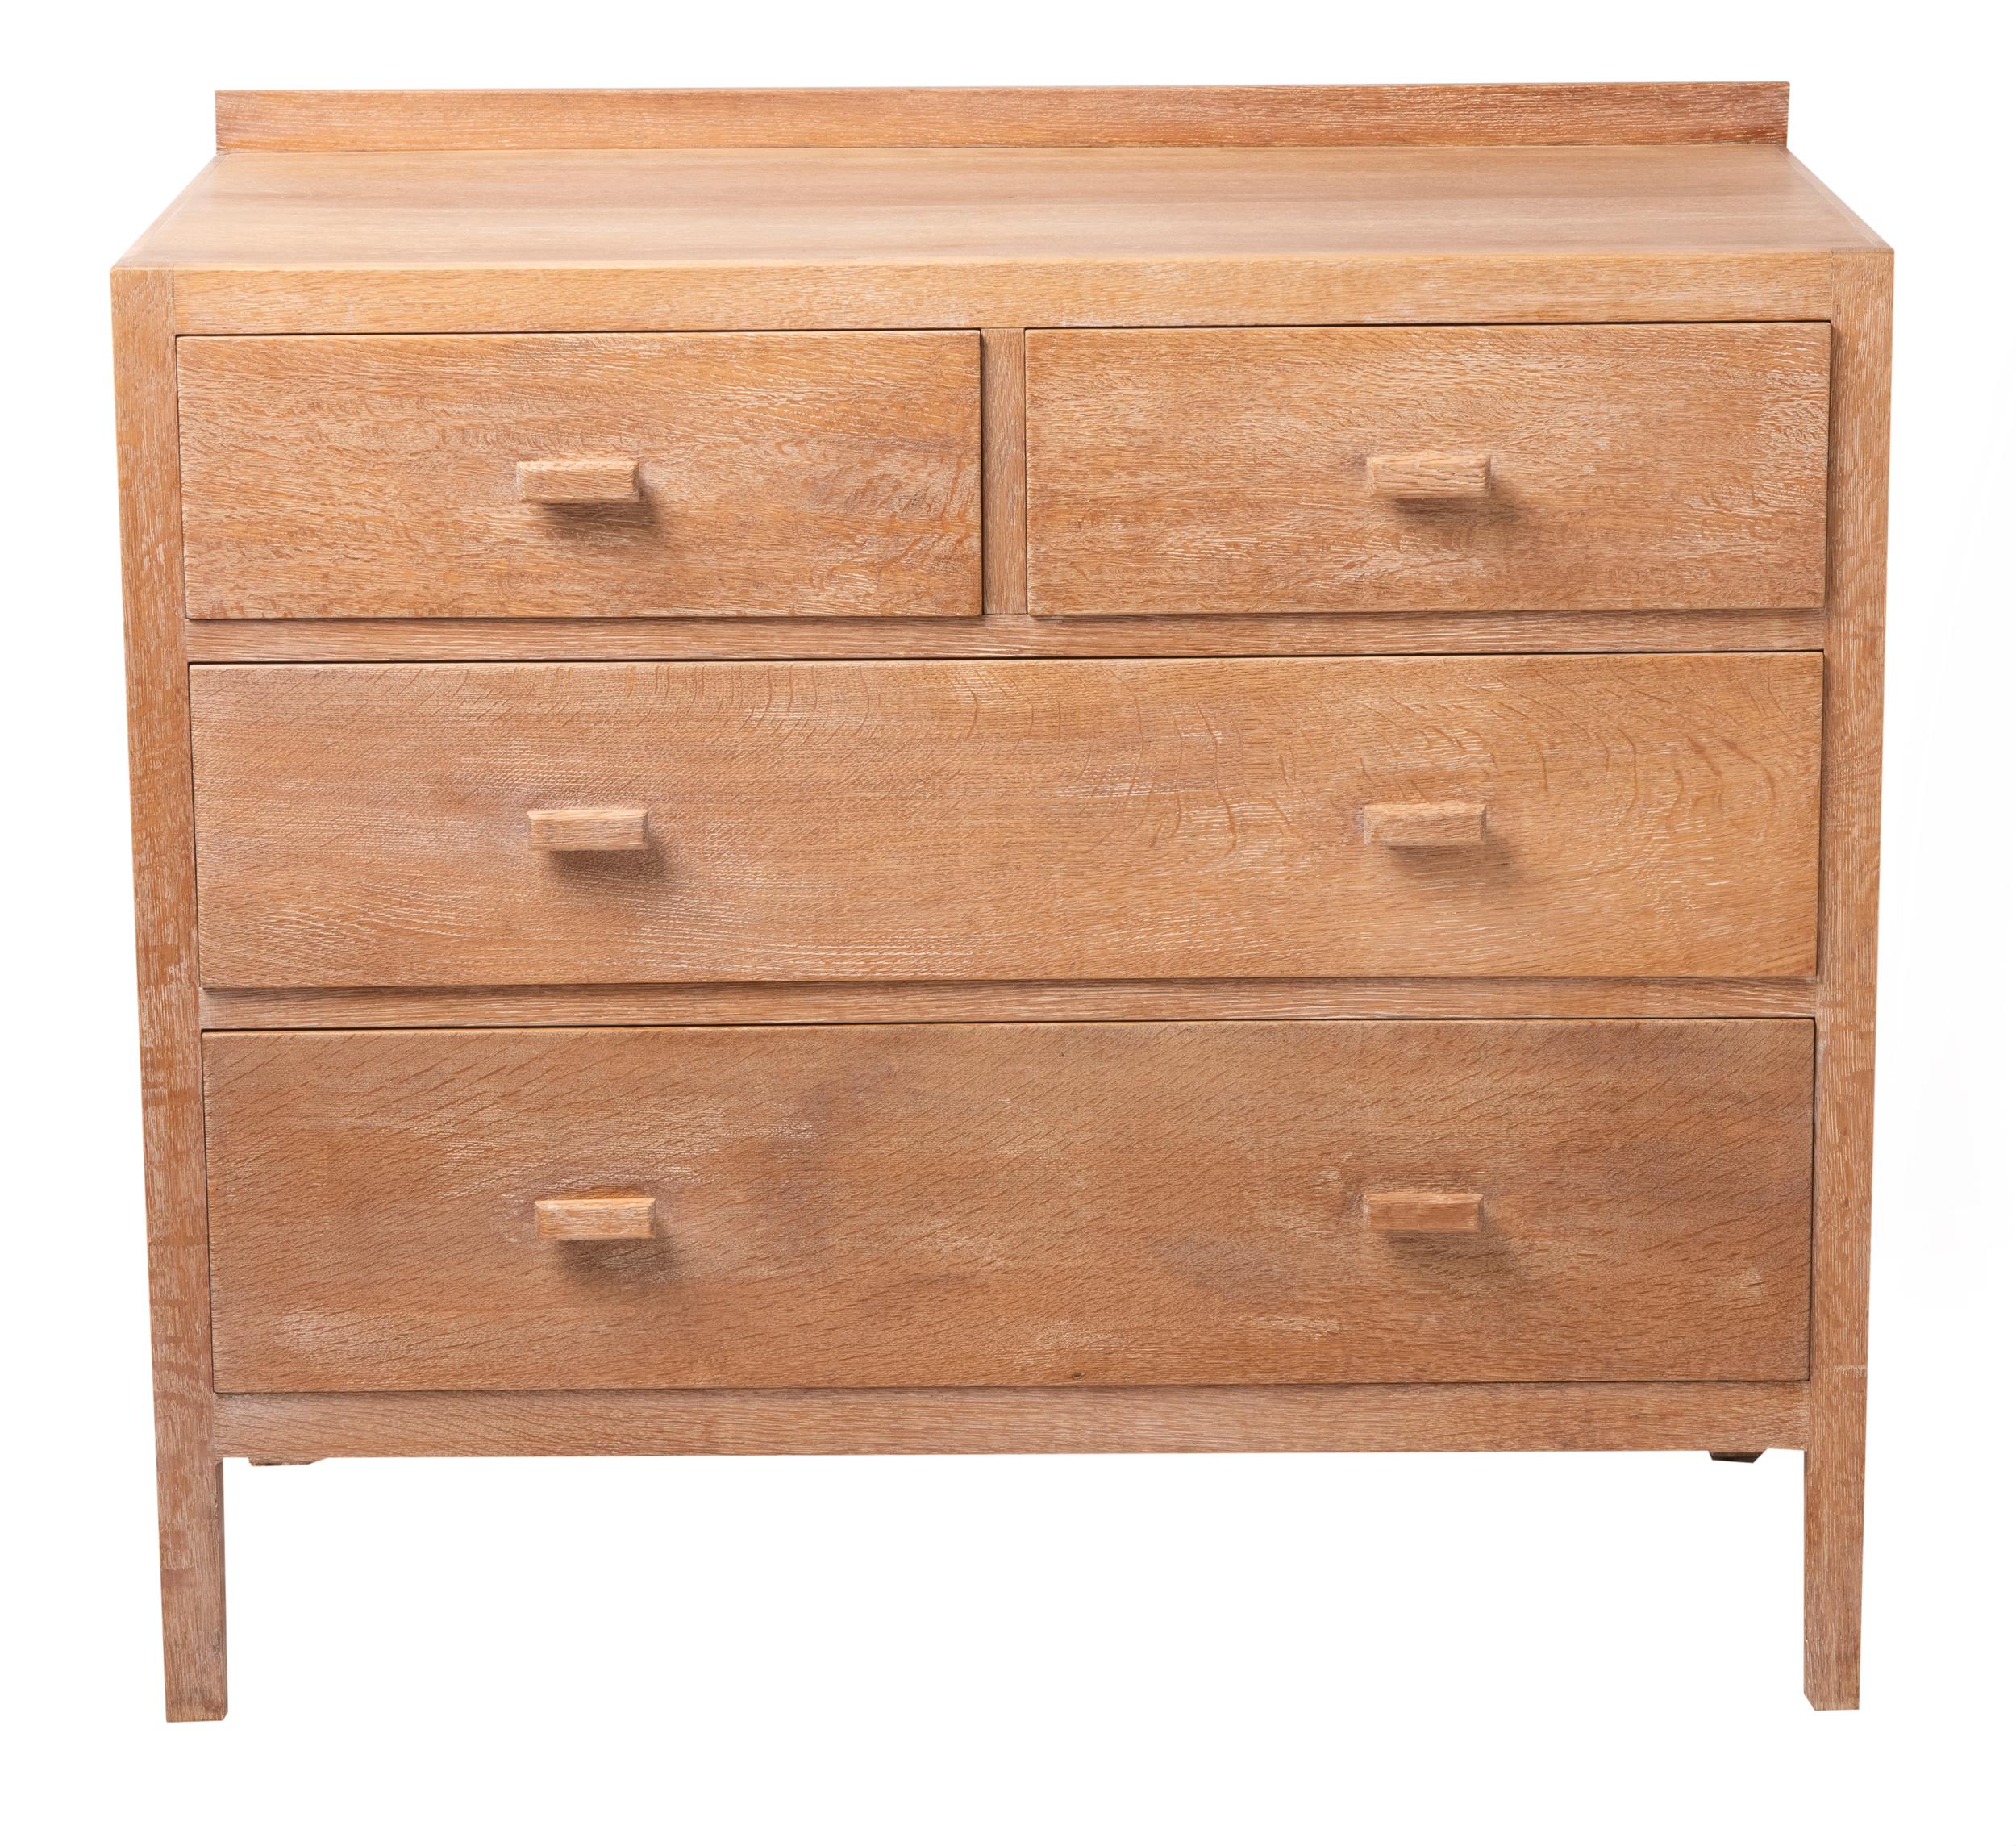 Limed oak chest of drawers by Heals.
Block limed handles.
Worn plaque to inside 1st drawer.
England, circa 1930
Measures: 92 cm wide x 48 cm deep x 83 cm high.
   